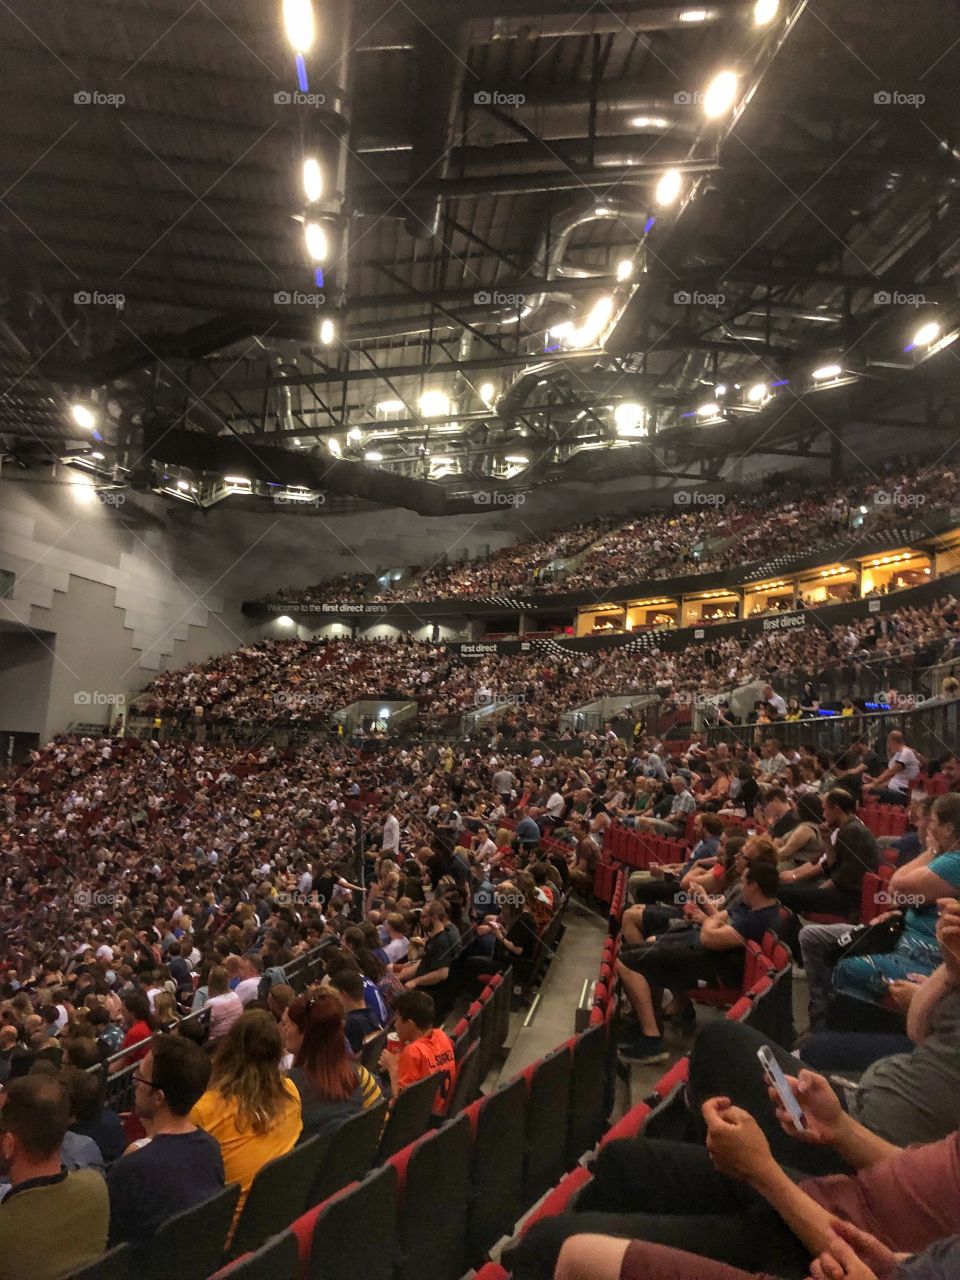 Audience waiting for flight of the concords at Leeds Arena Yorkshire uk